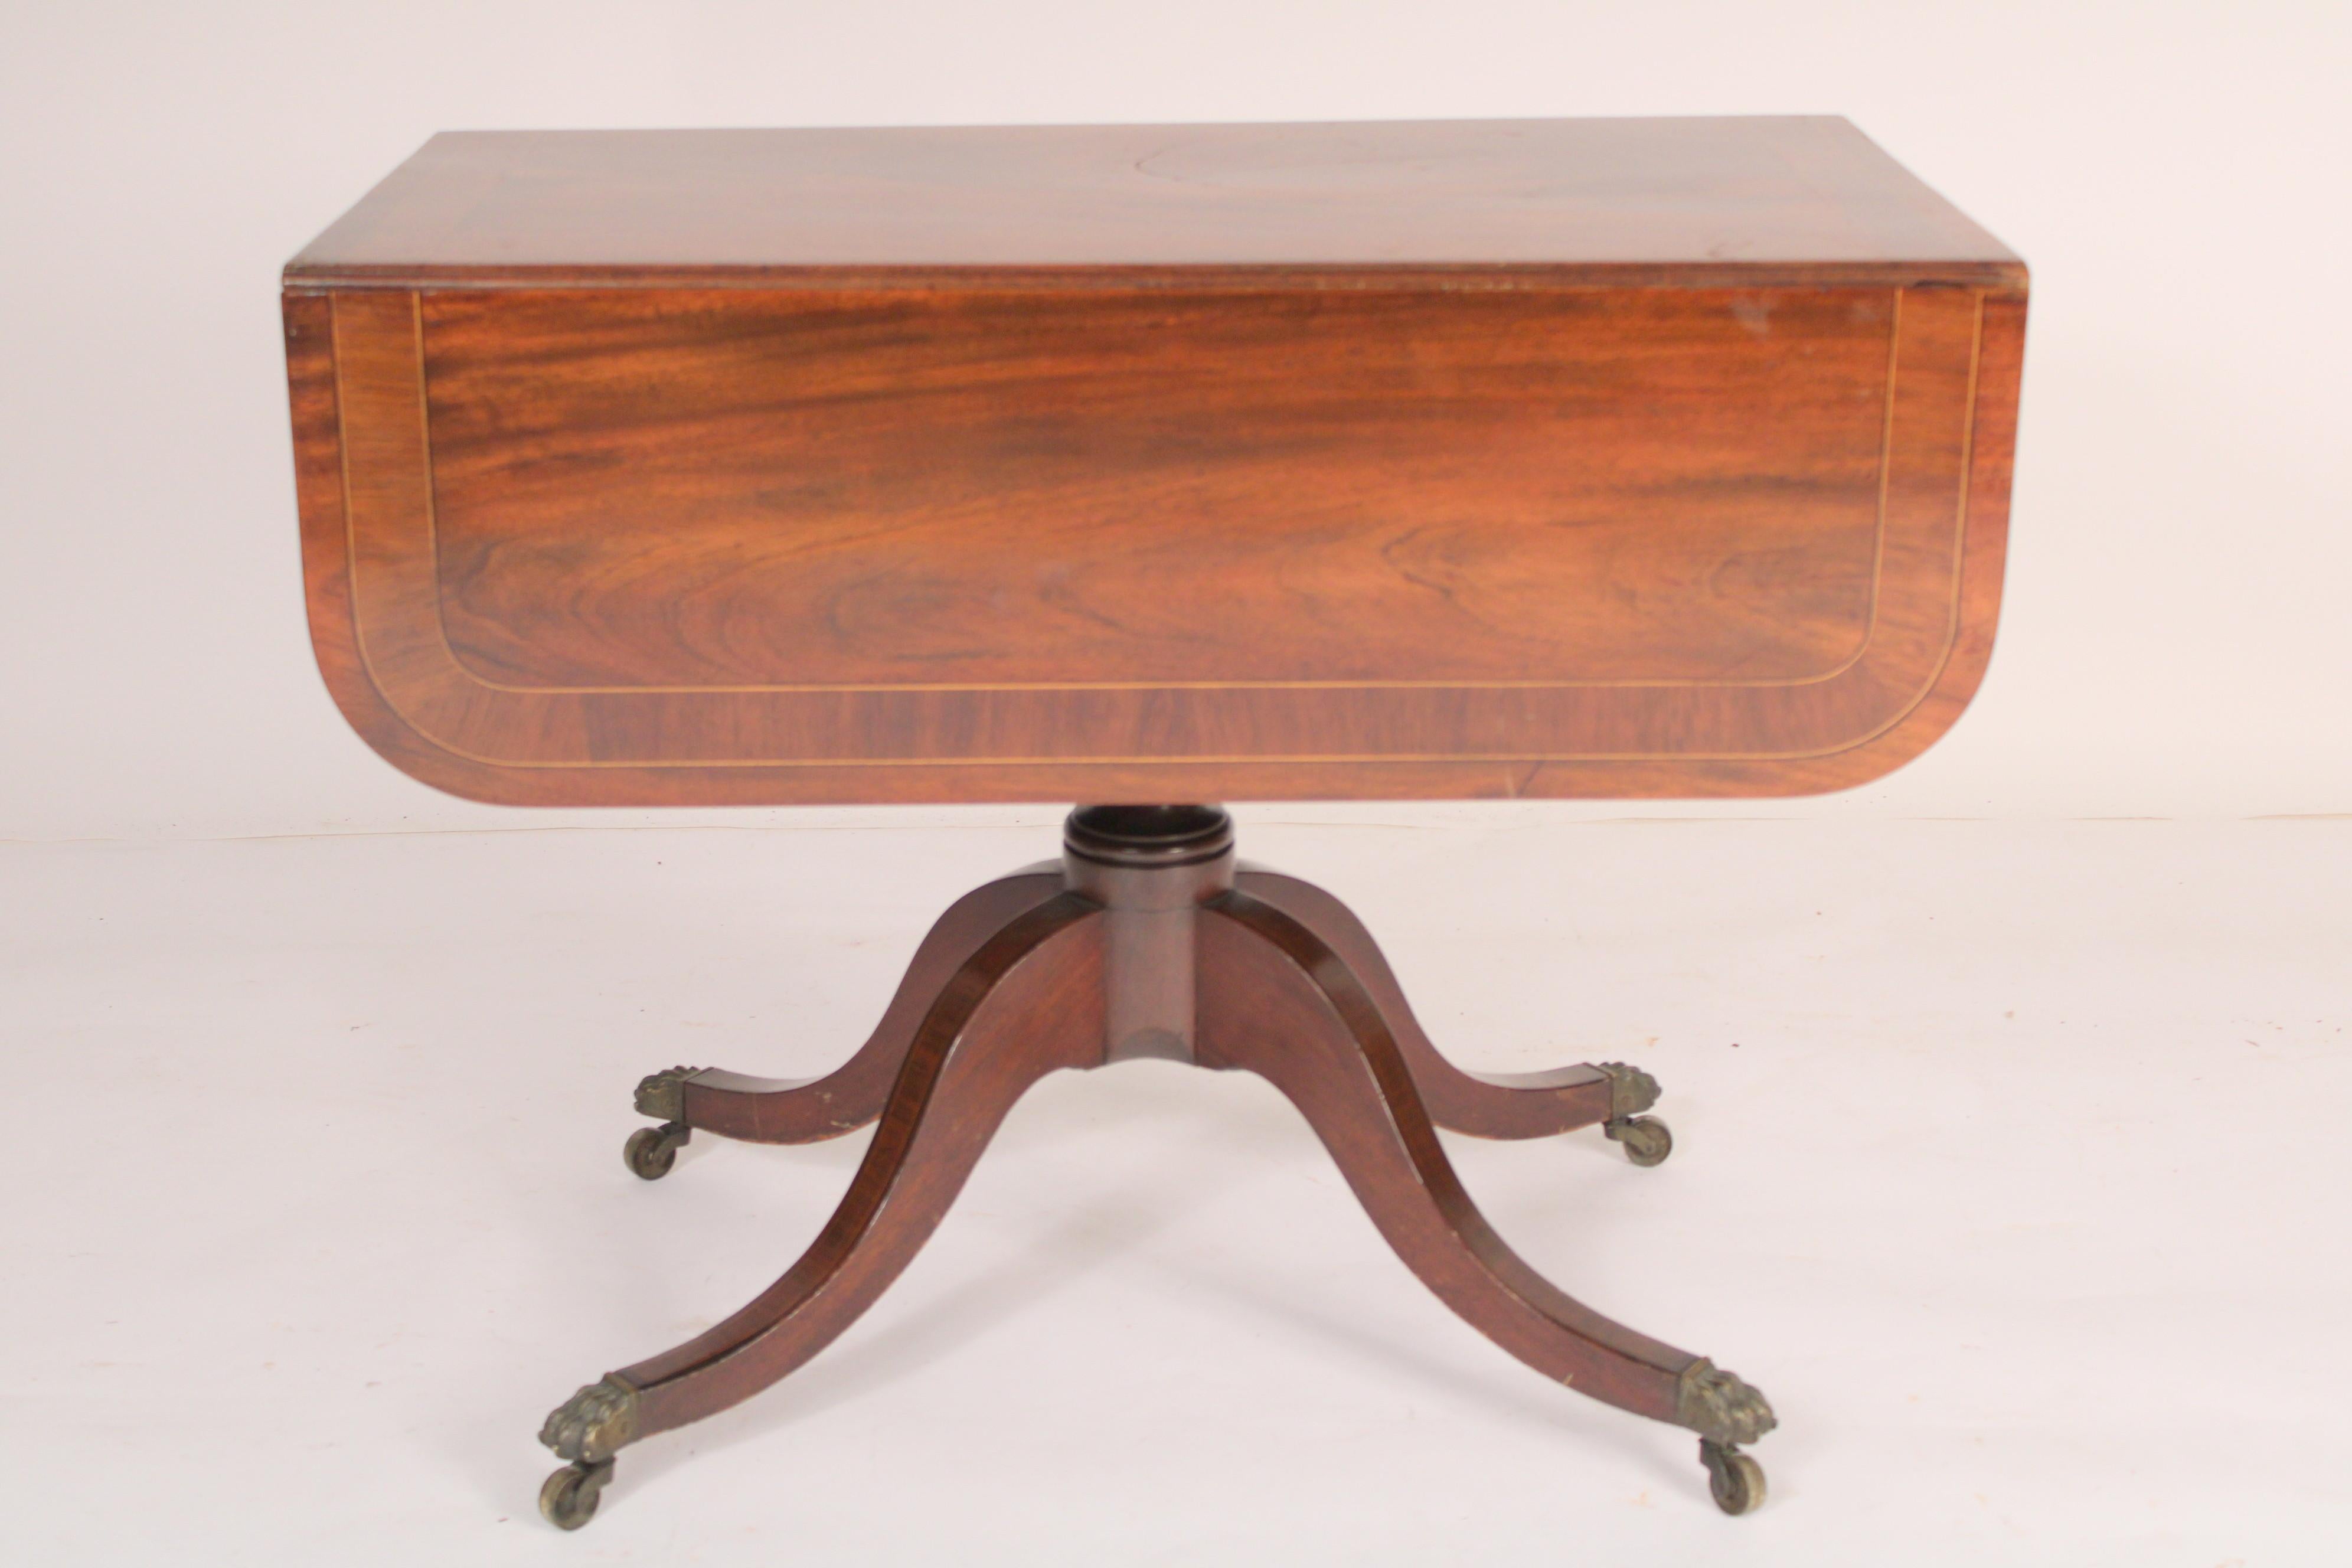 English regency mahogany drop leaf occasional table, circa 1820. An exquisite mahogany top with rosewood cross banding, frieze drawer with wood knobs, a baluster and ring turned pedestal, four down swept legs ending in brass lion paw feet on brass